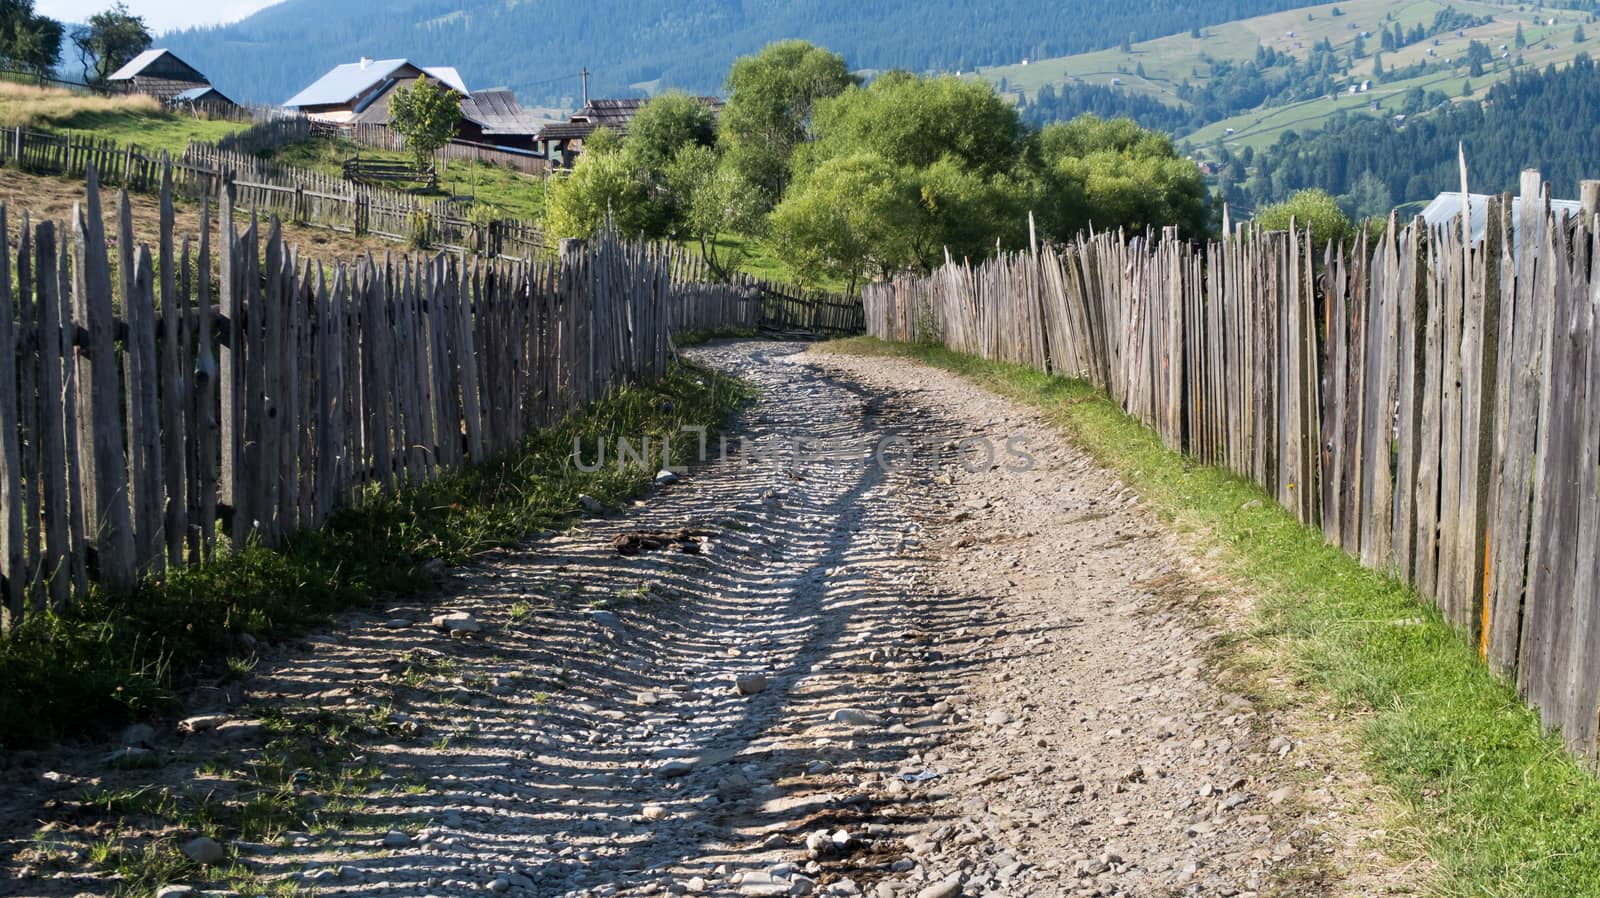 Road with ballast in the mountains with houses - fence in the mountains by codrinn